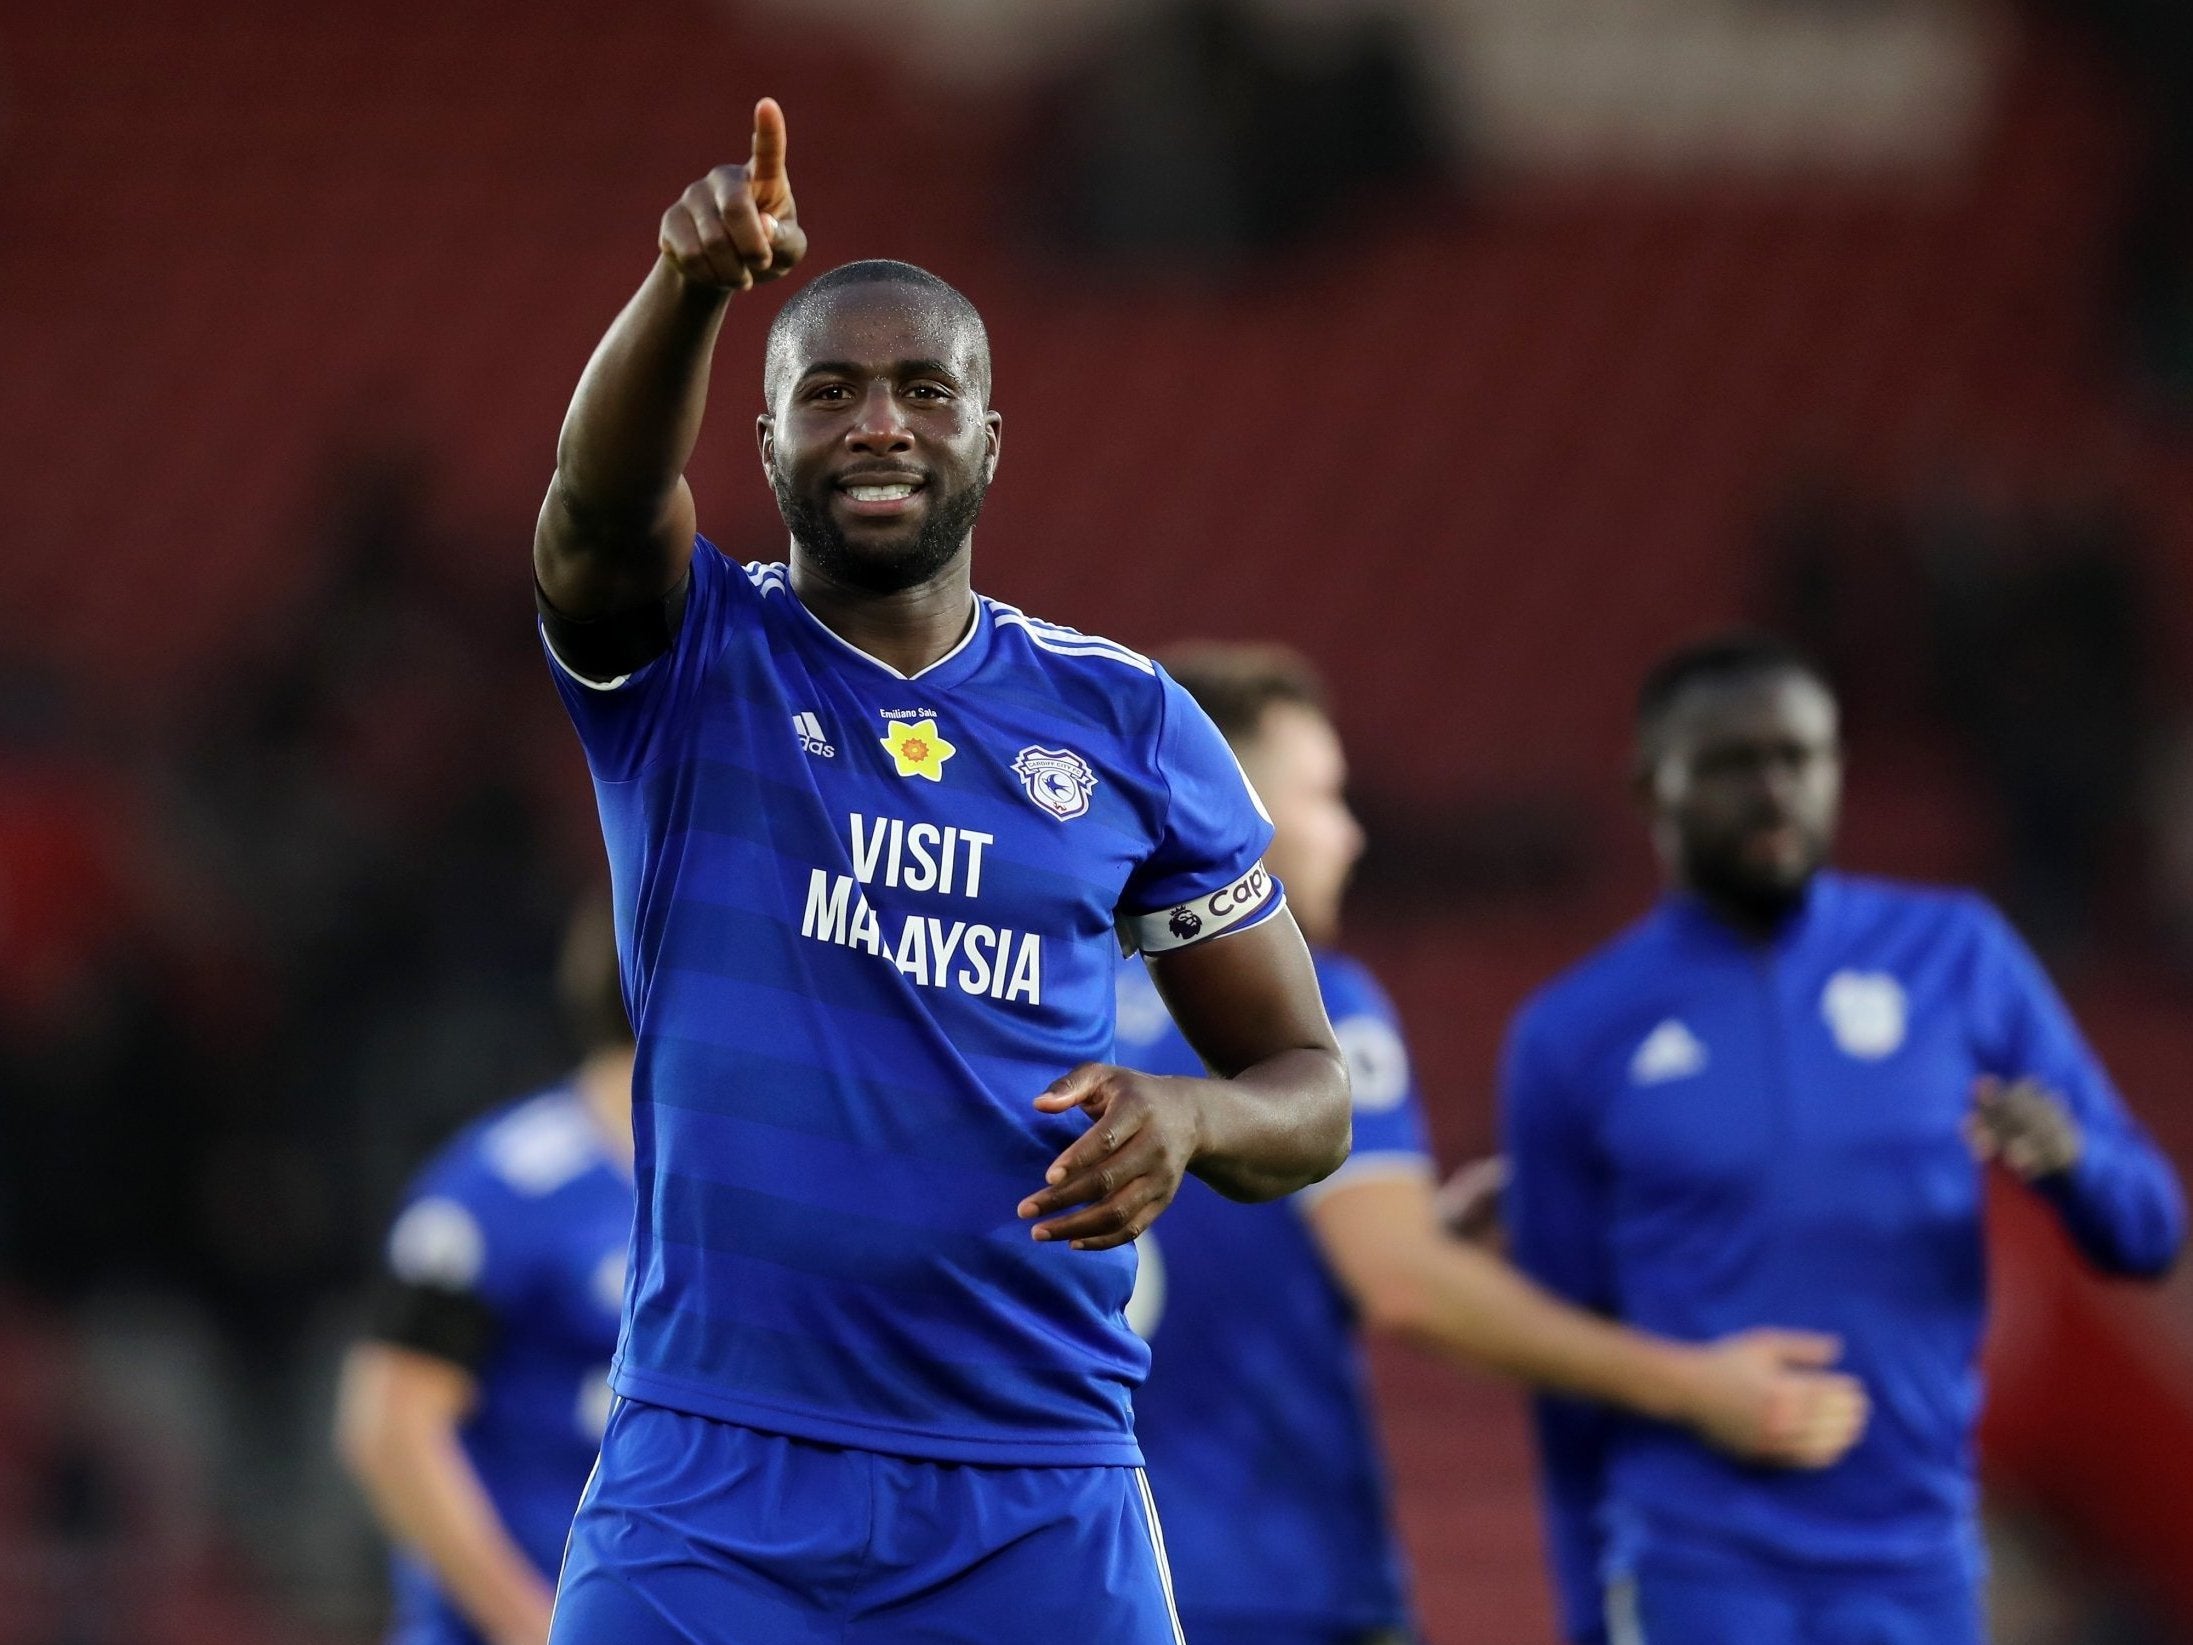 Cardiff won an emotional game at St Marys'